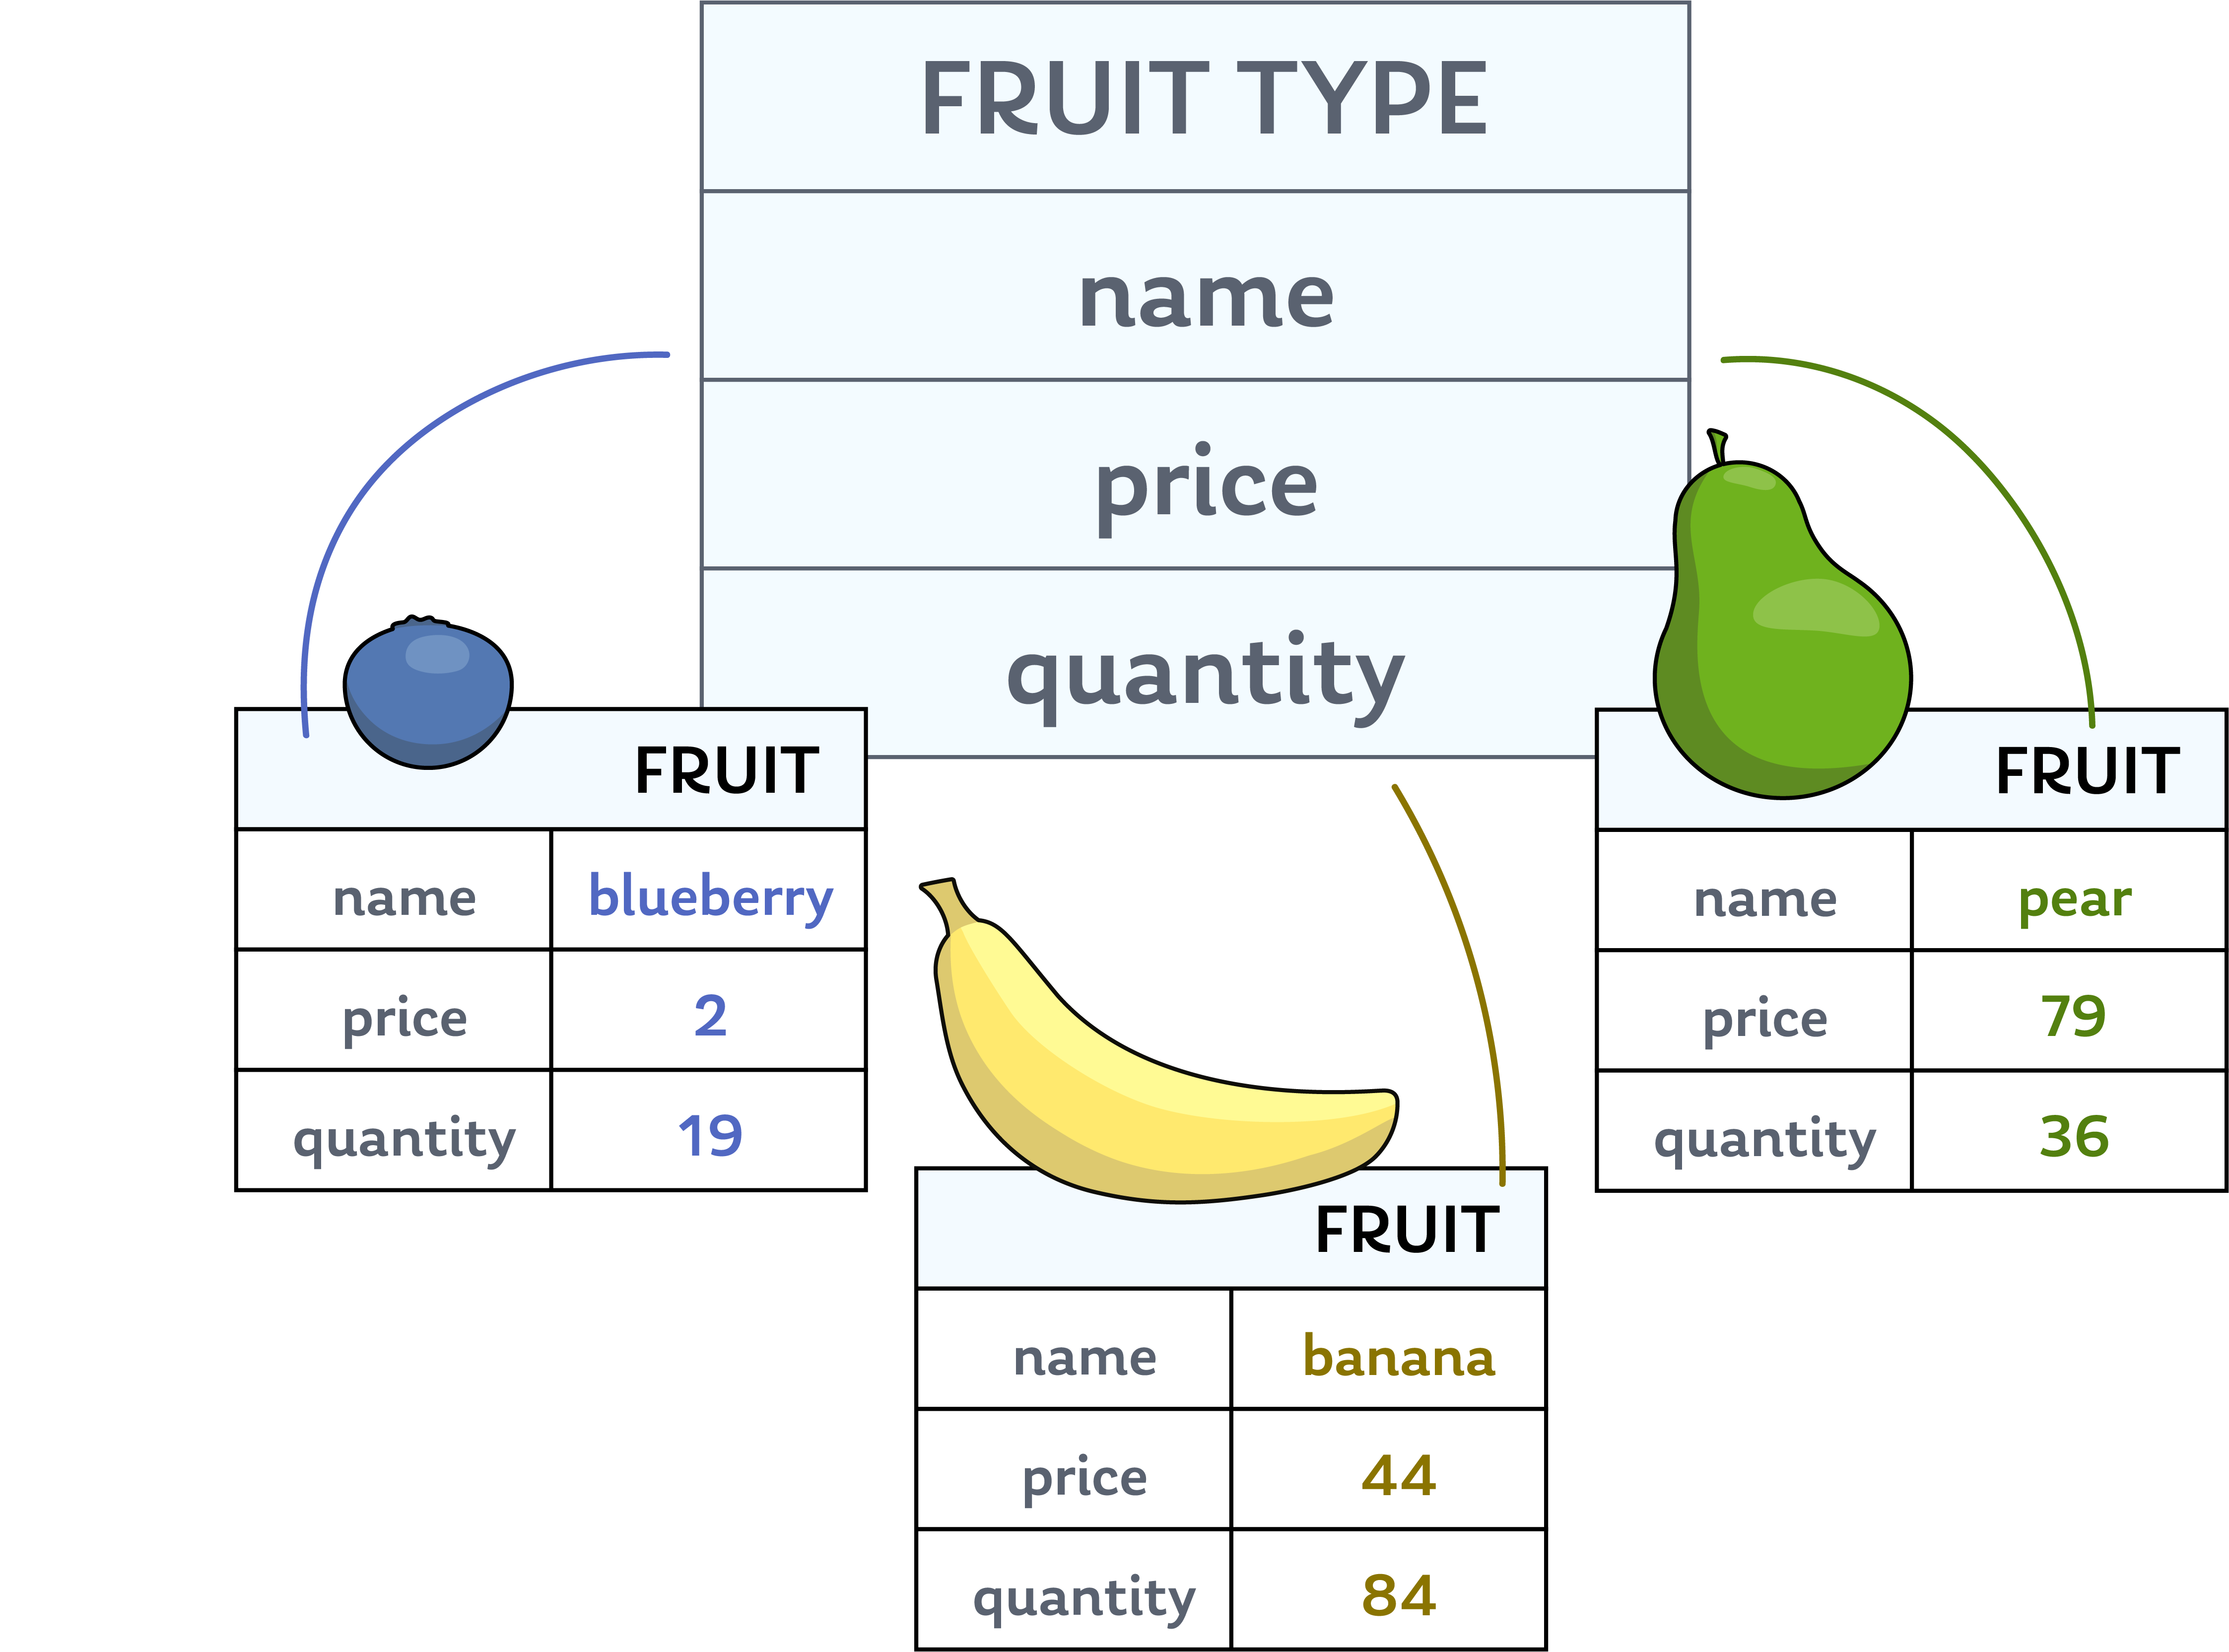 Three different kinds of fruit, represented individually as instances of the Fruit type with a name, price, and quantity.